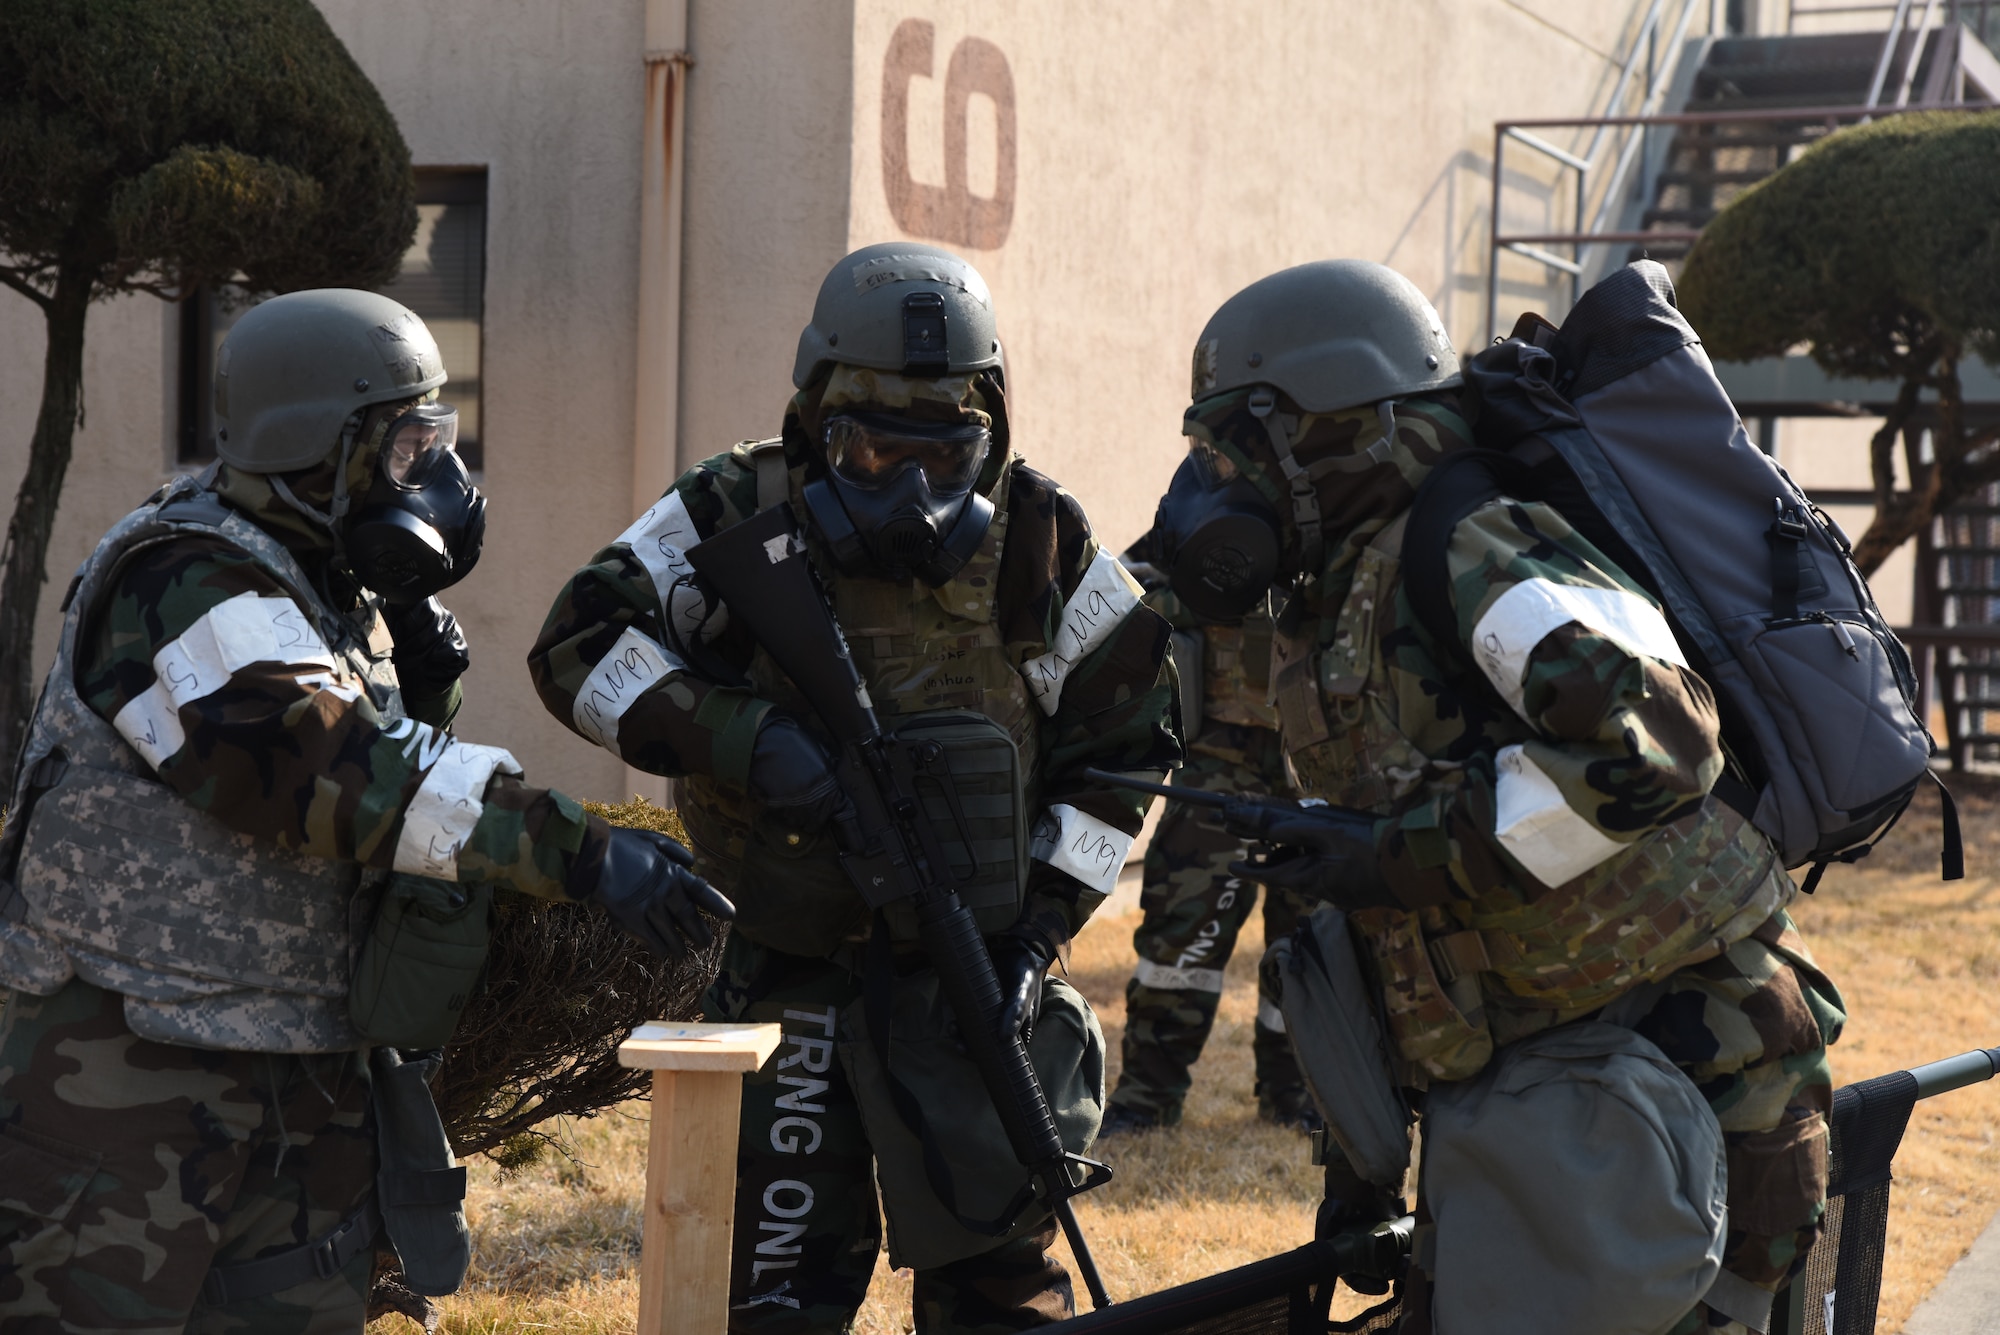 U.S. Air Force Airmen from the 51st Force Support Squadron check for simulated chemicals during a post-attack reconnaissance (PAR) sweep during a training event at Osan Air Base, Republic of Korea, Feb. 1, 2023. PAR sweeps are conducted following an attack to check for any possible hazards within a perimeter surrounding structures. (U.S. Air Force photo by 1st Lt Michelle Chang)